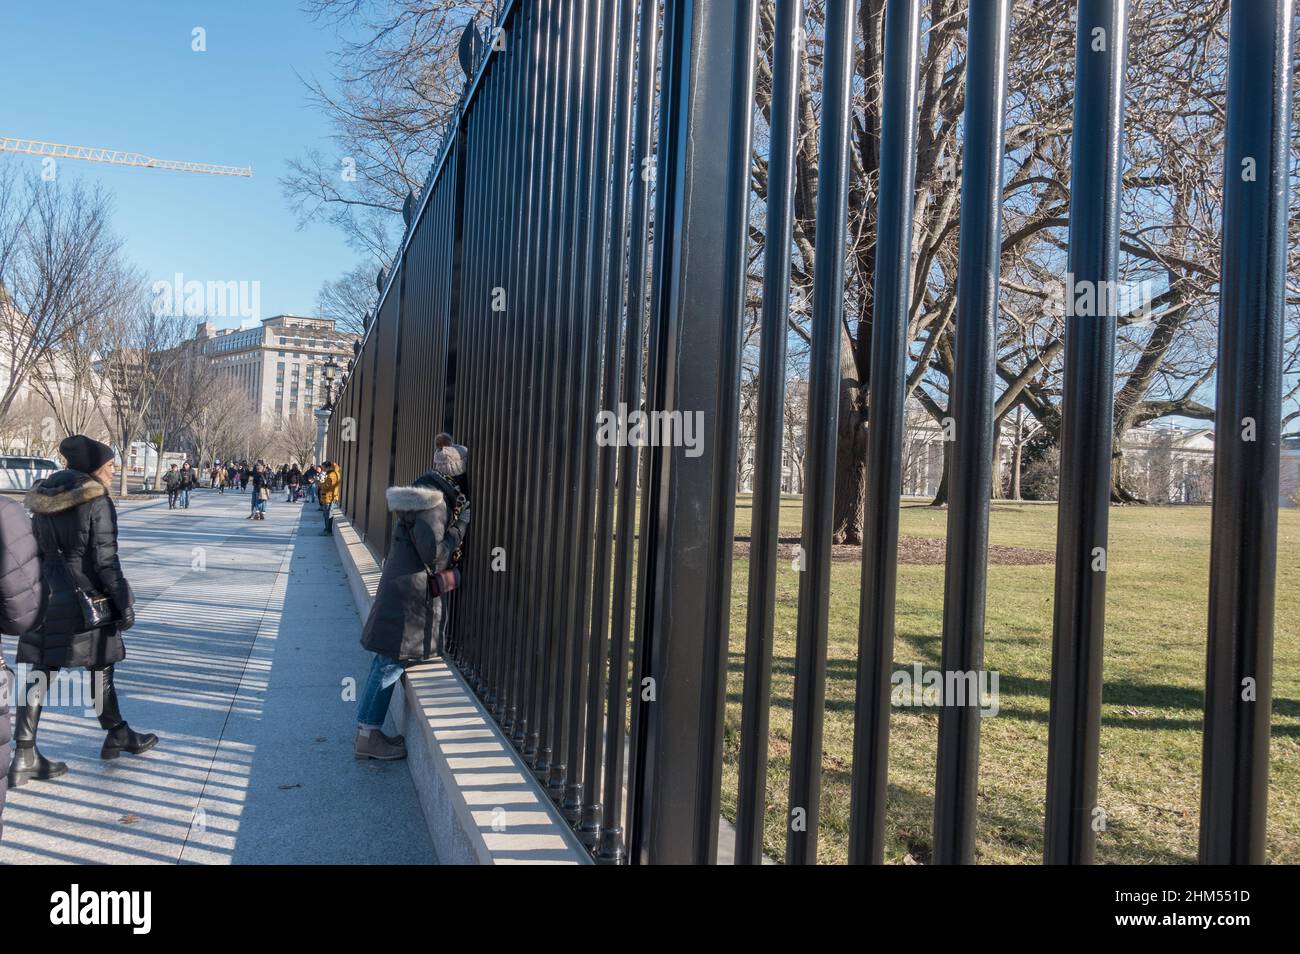 Washington DC: The new 13-foot fence around the White House, installation completed in 2021, has anti-climb spikes on top and is double the height of  the intruder-prone fence it replaced. Stock Photo